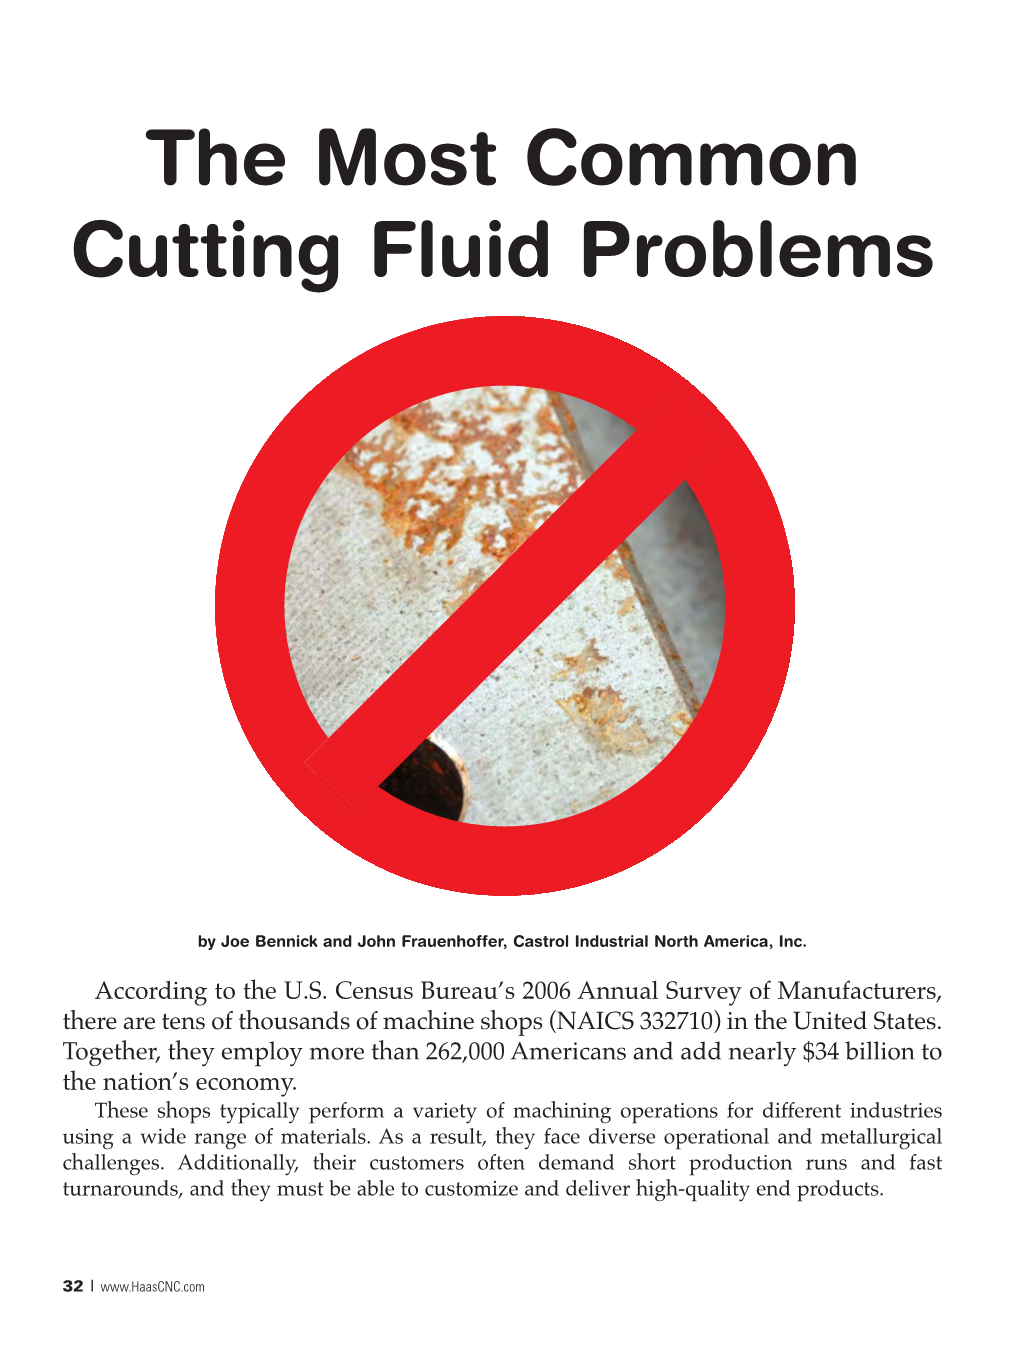 The Most Common Cutting Fluid Problems from CNC Machining